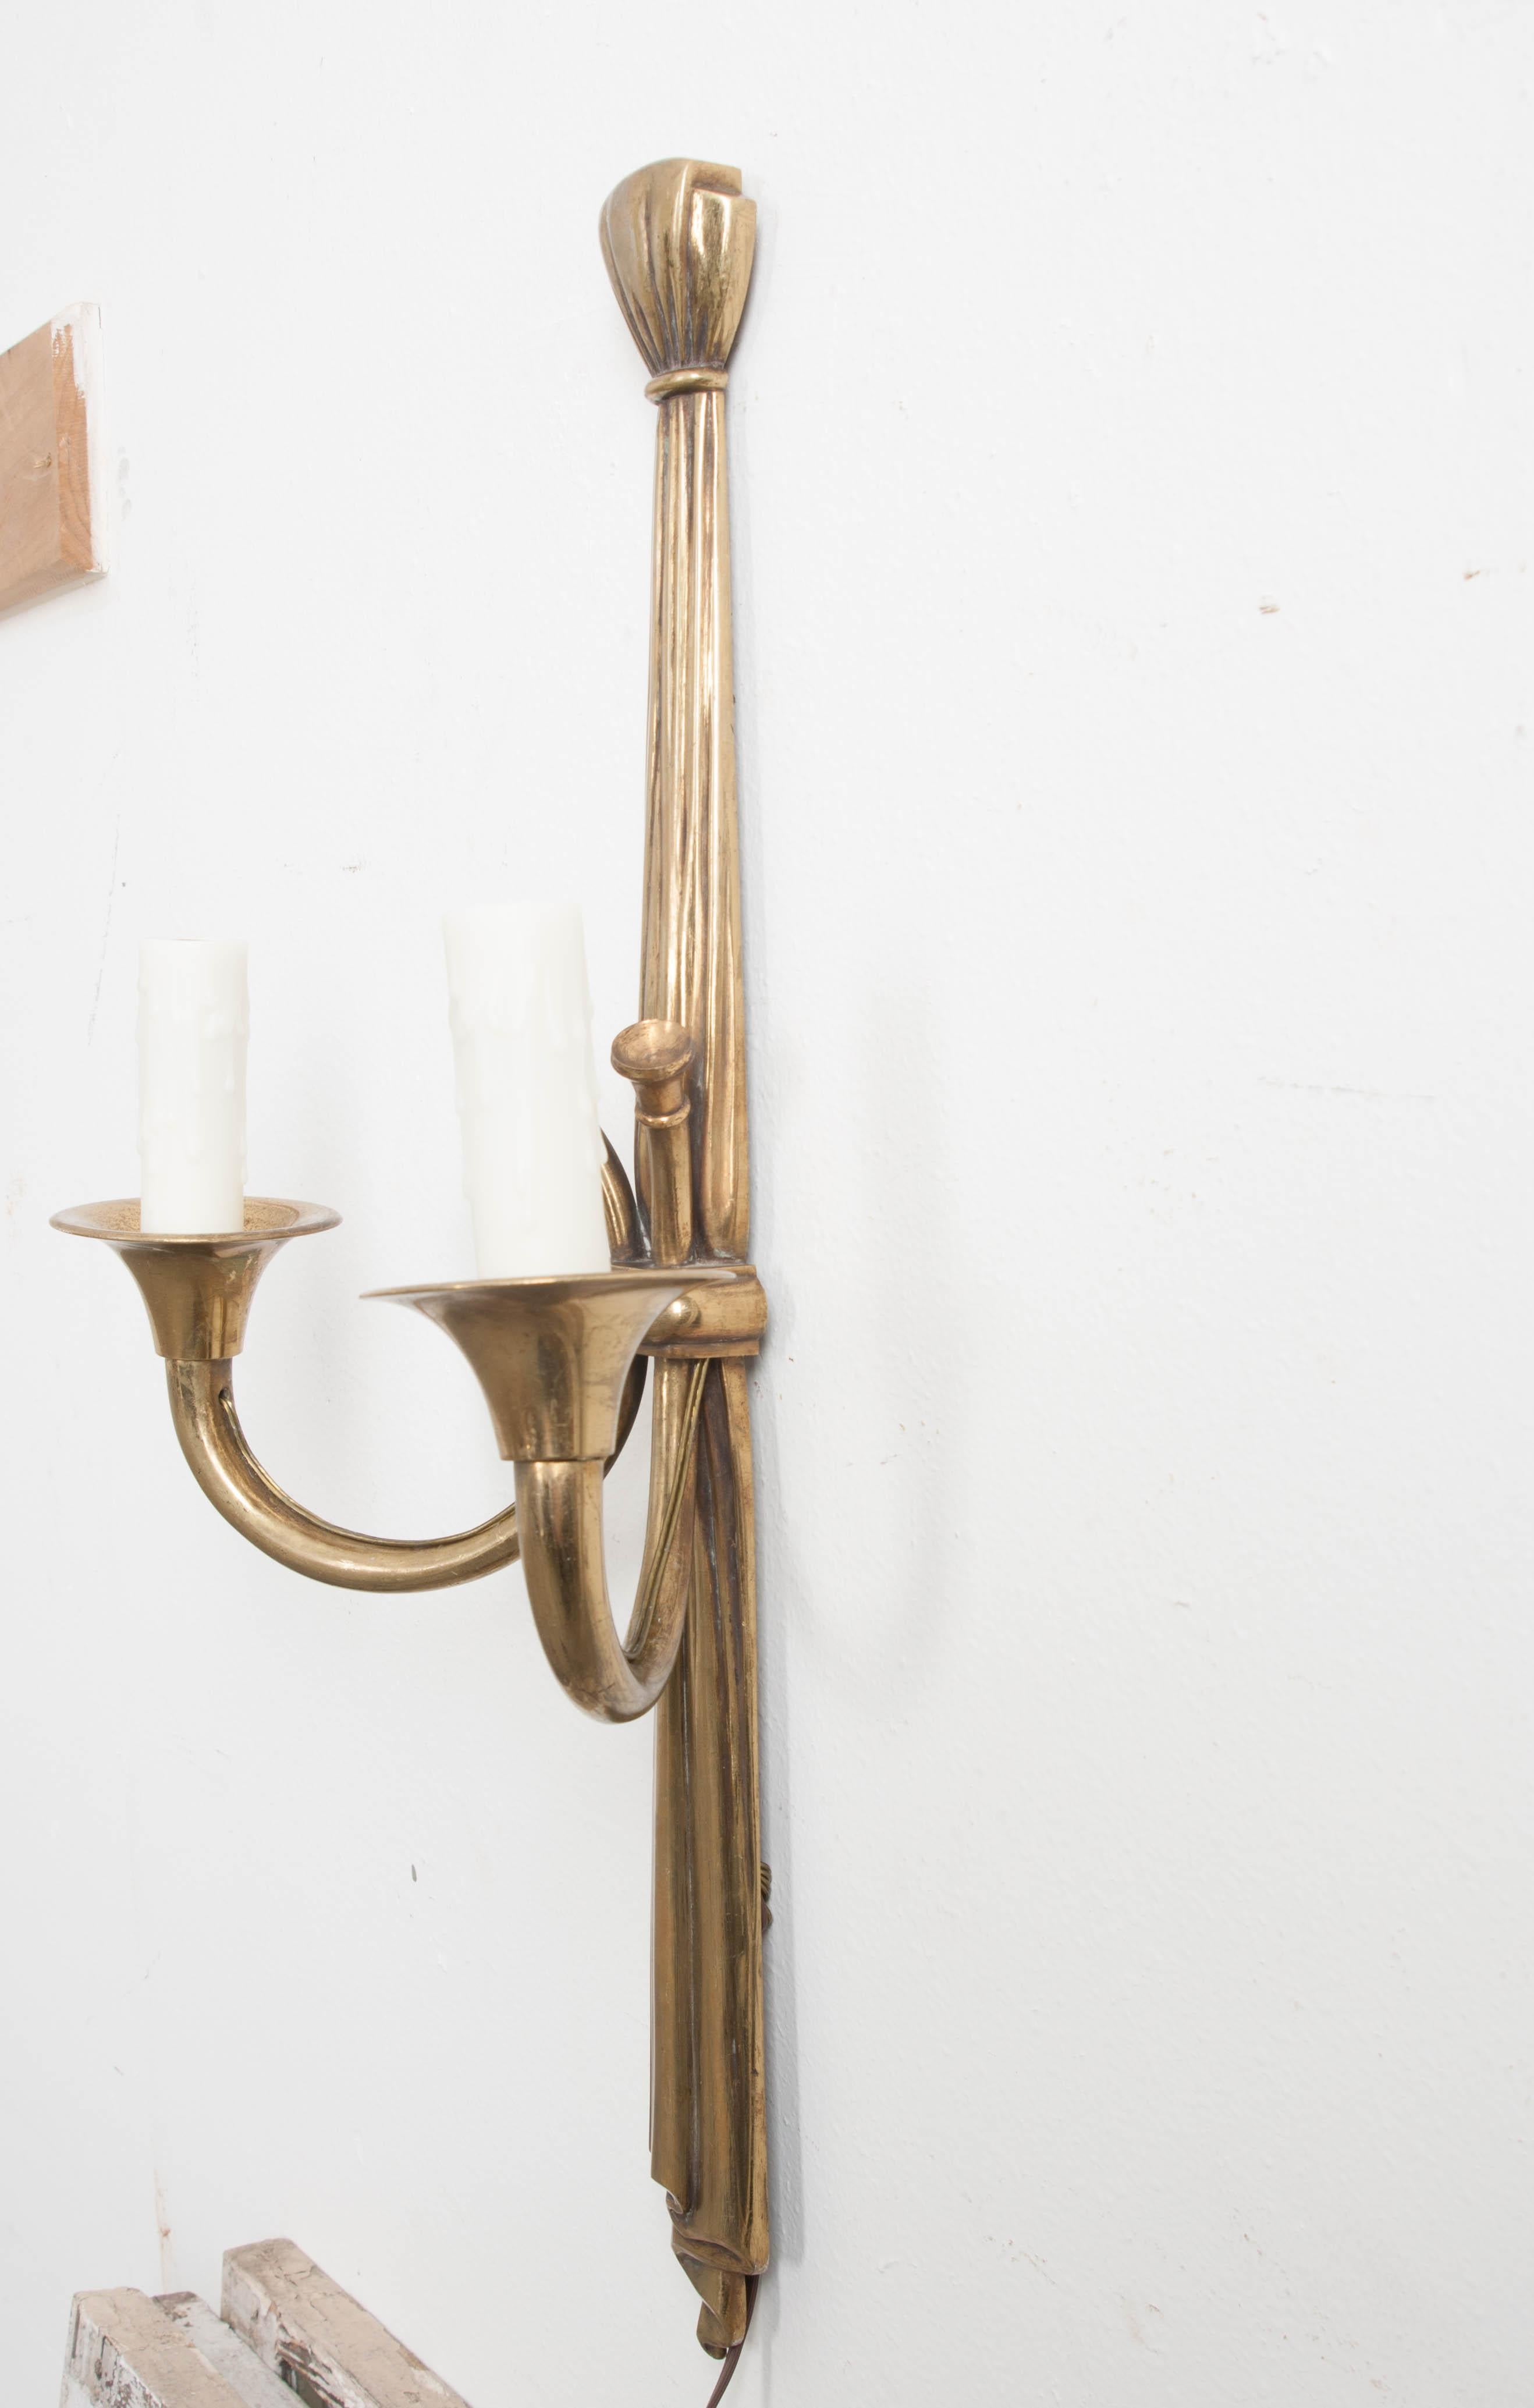 This elegant and weighty pair of Neoclassical-style solid brass double-arm sconces, circa 1880, are from France and feature “draped” standards and Horn-form arms and bobeches. These sconces have recently been outfitted with faux candlesticks and